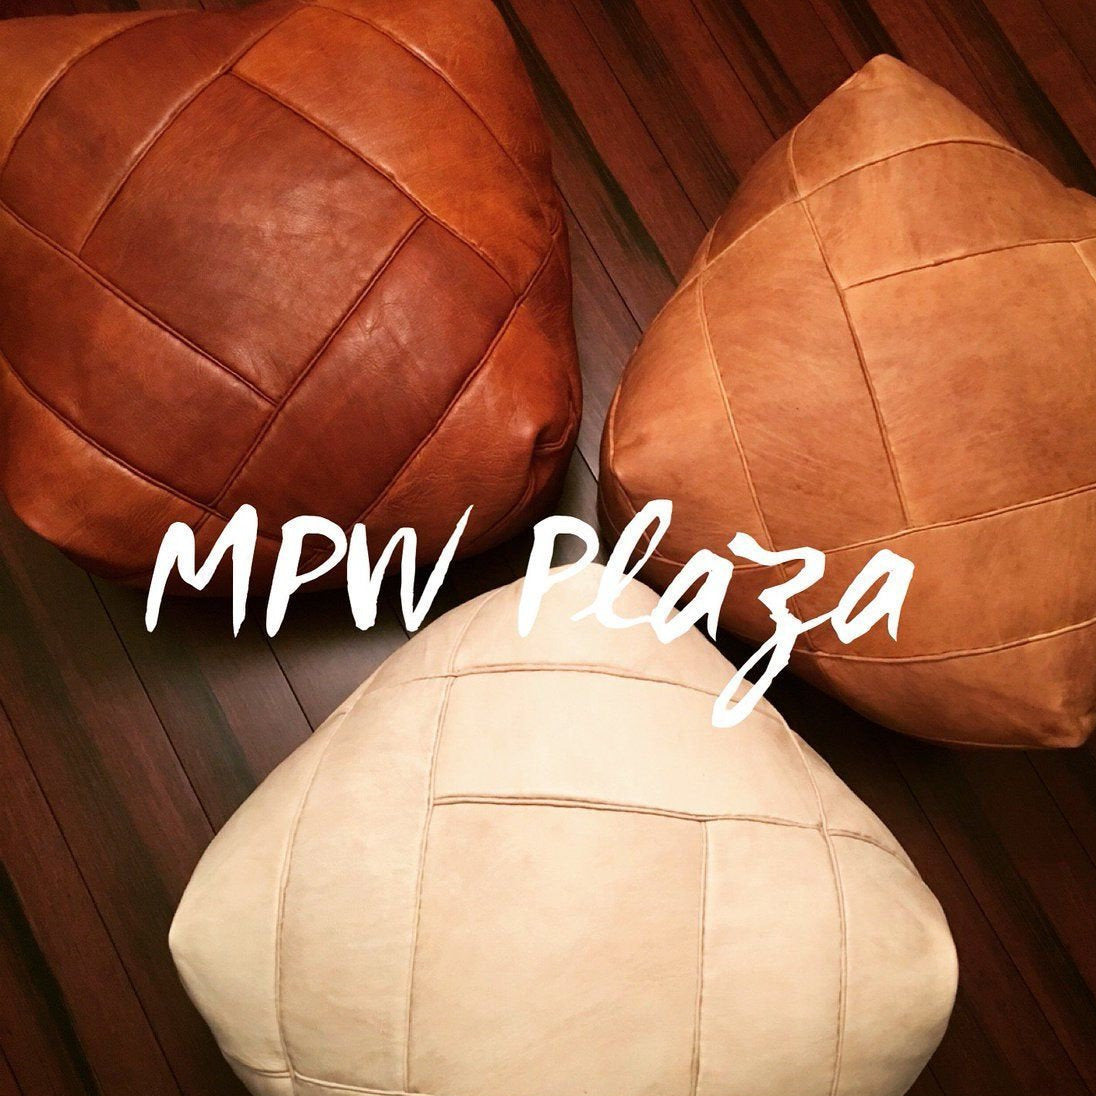 MPW Plaza® ZigZag Moroccan Pouf Sand Square 16" x 26" crafted by hand Premium Moroccan Leather Limited edition exclusive couture ottoman (Stuffed) freeshipping - MPW Plaza®